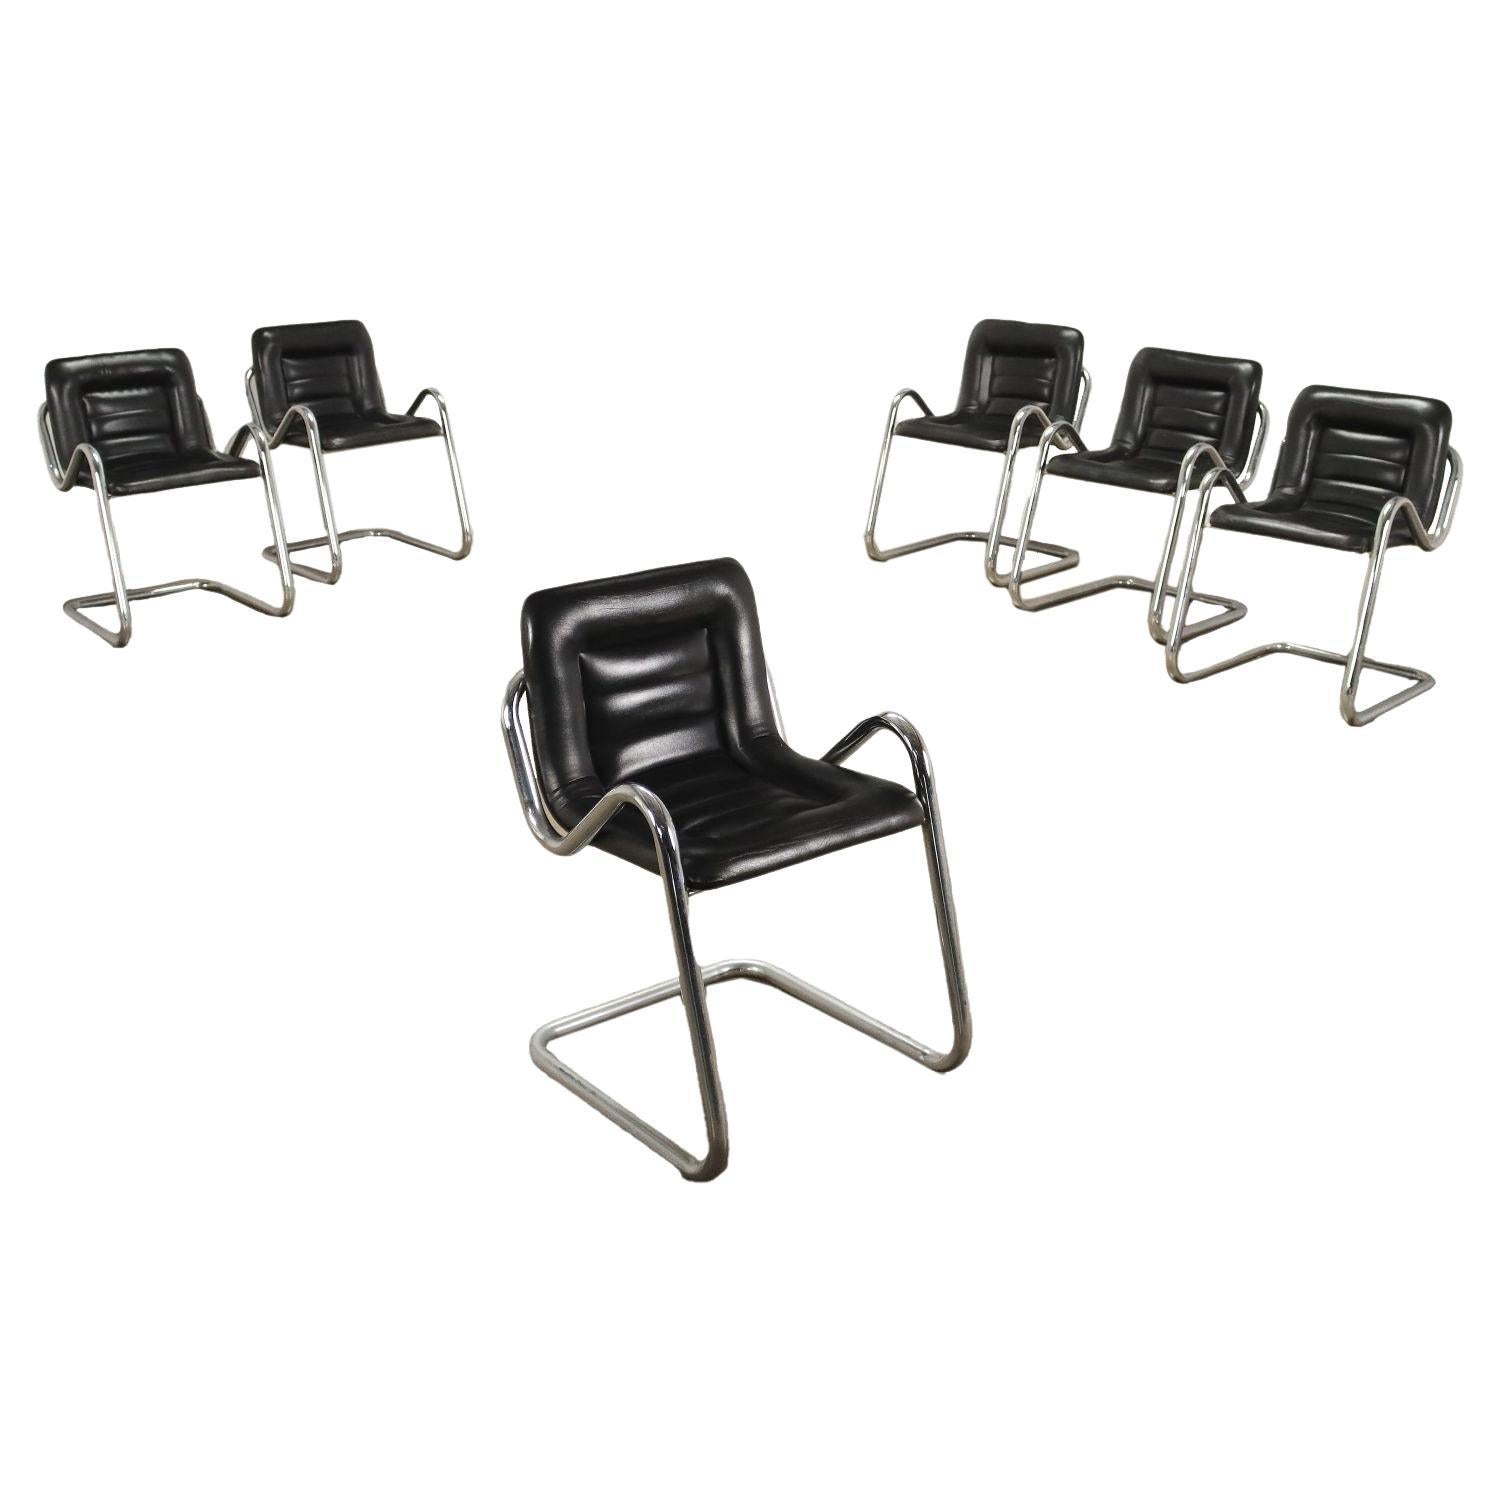 Group of 6 Chairs Leatherette, Italy, 1970s